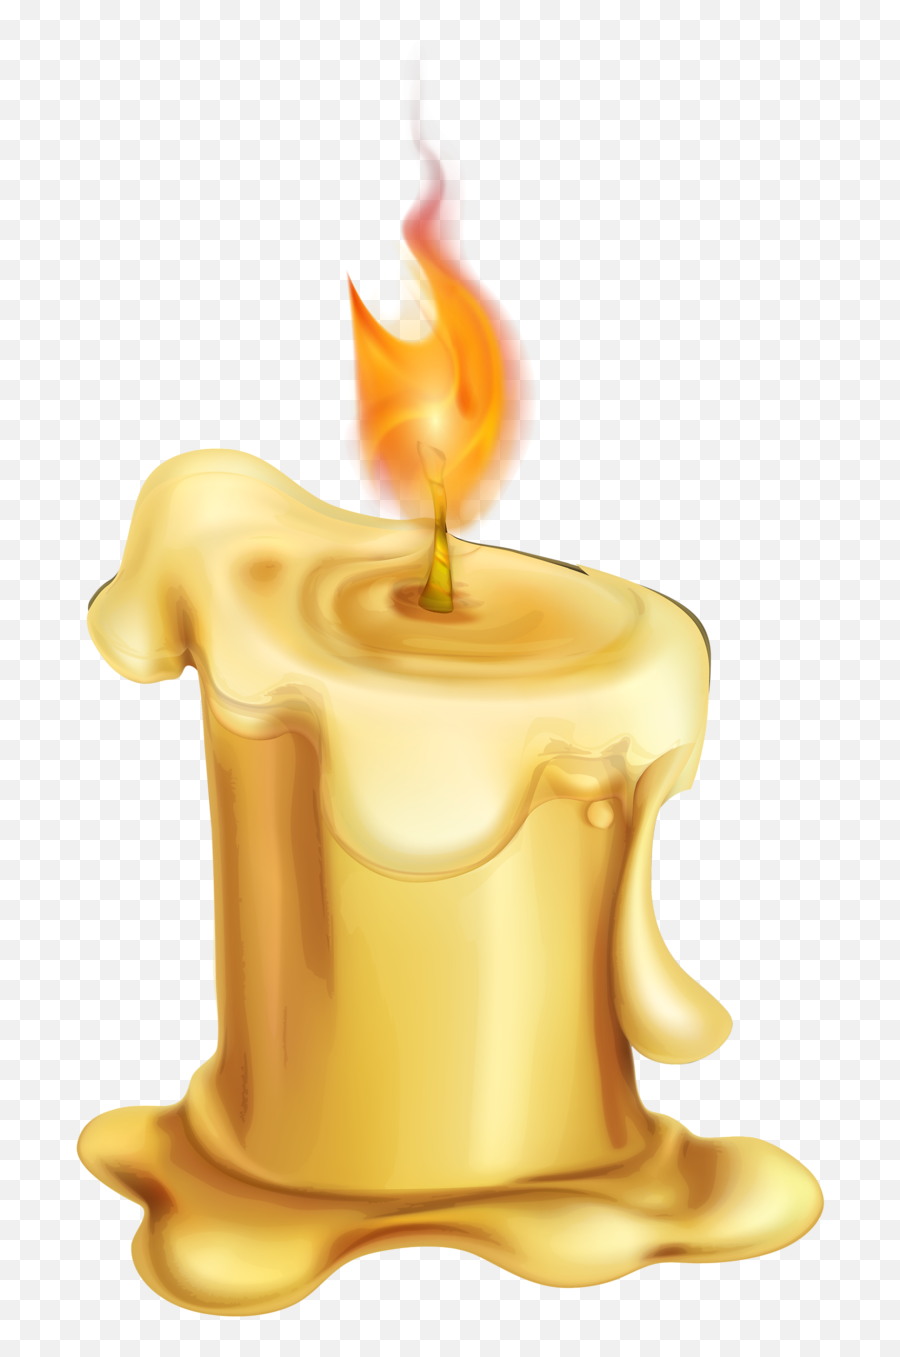 Clipart Candle Burning Transparent - Transparent Background Candle Clipart Png,Candle Flame Png